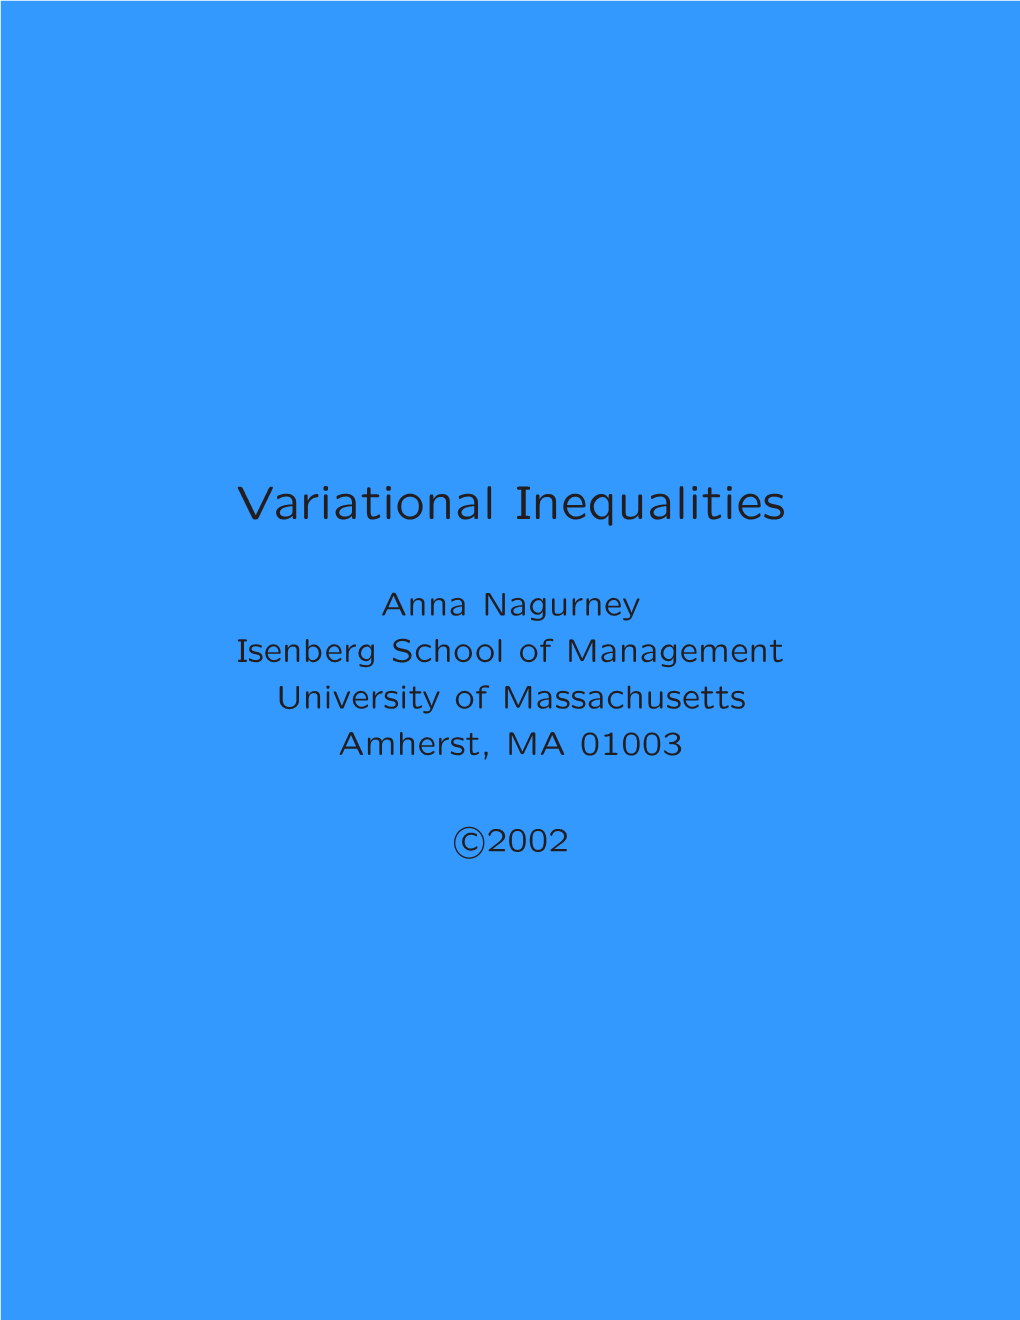 Variational Inequality Problems Include